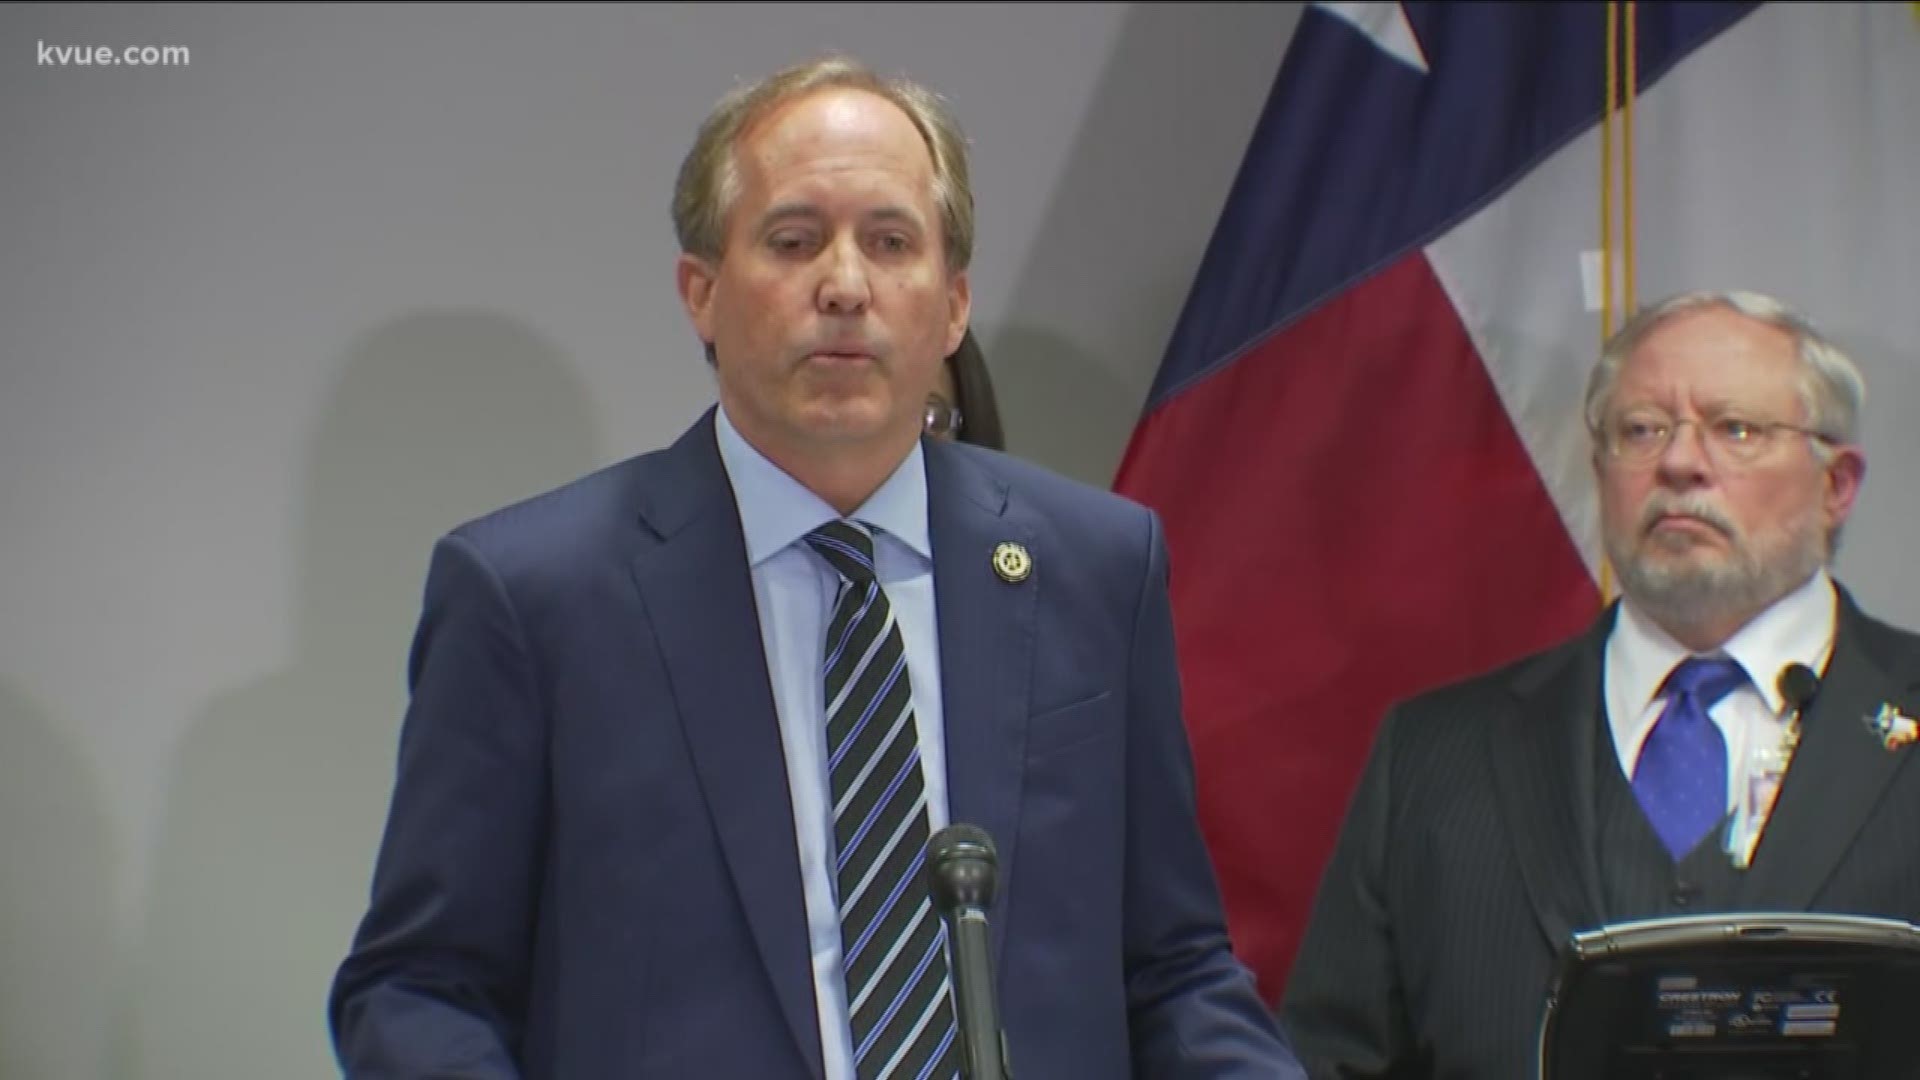 Texas Attorney General Ken Paxton has filed a lawsuit against the City of San Antonio as the Chick-fil-A saga continues.